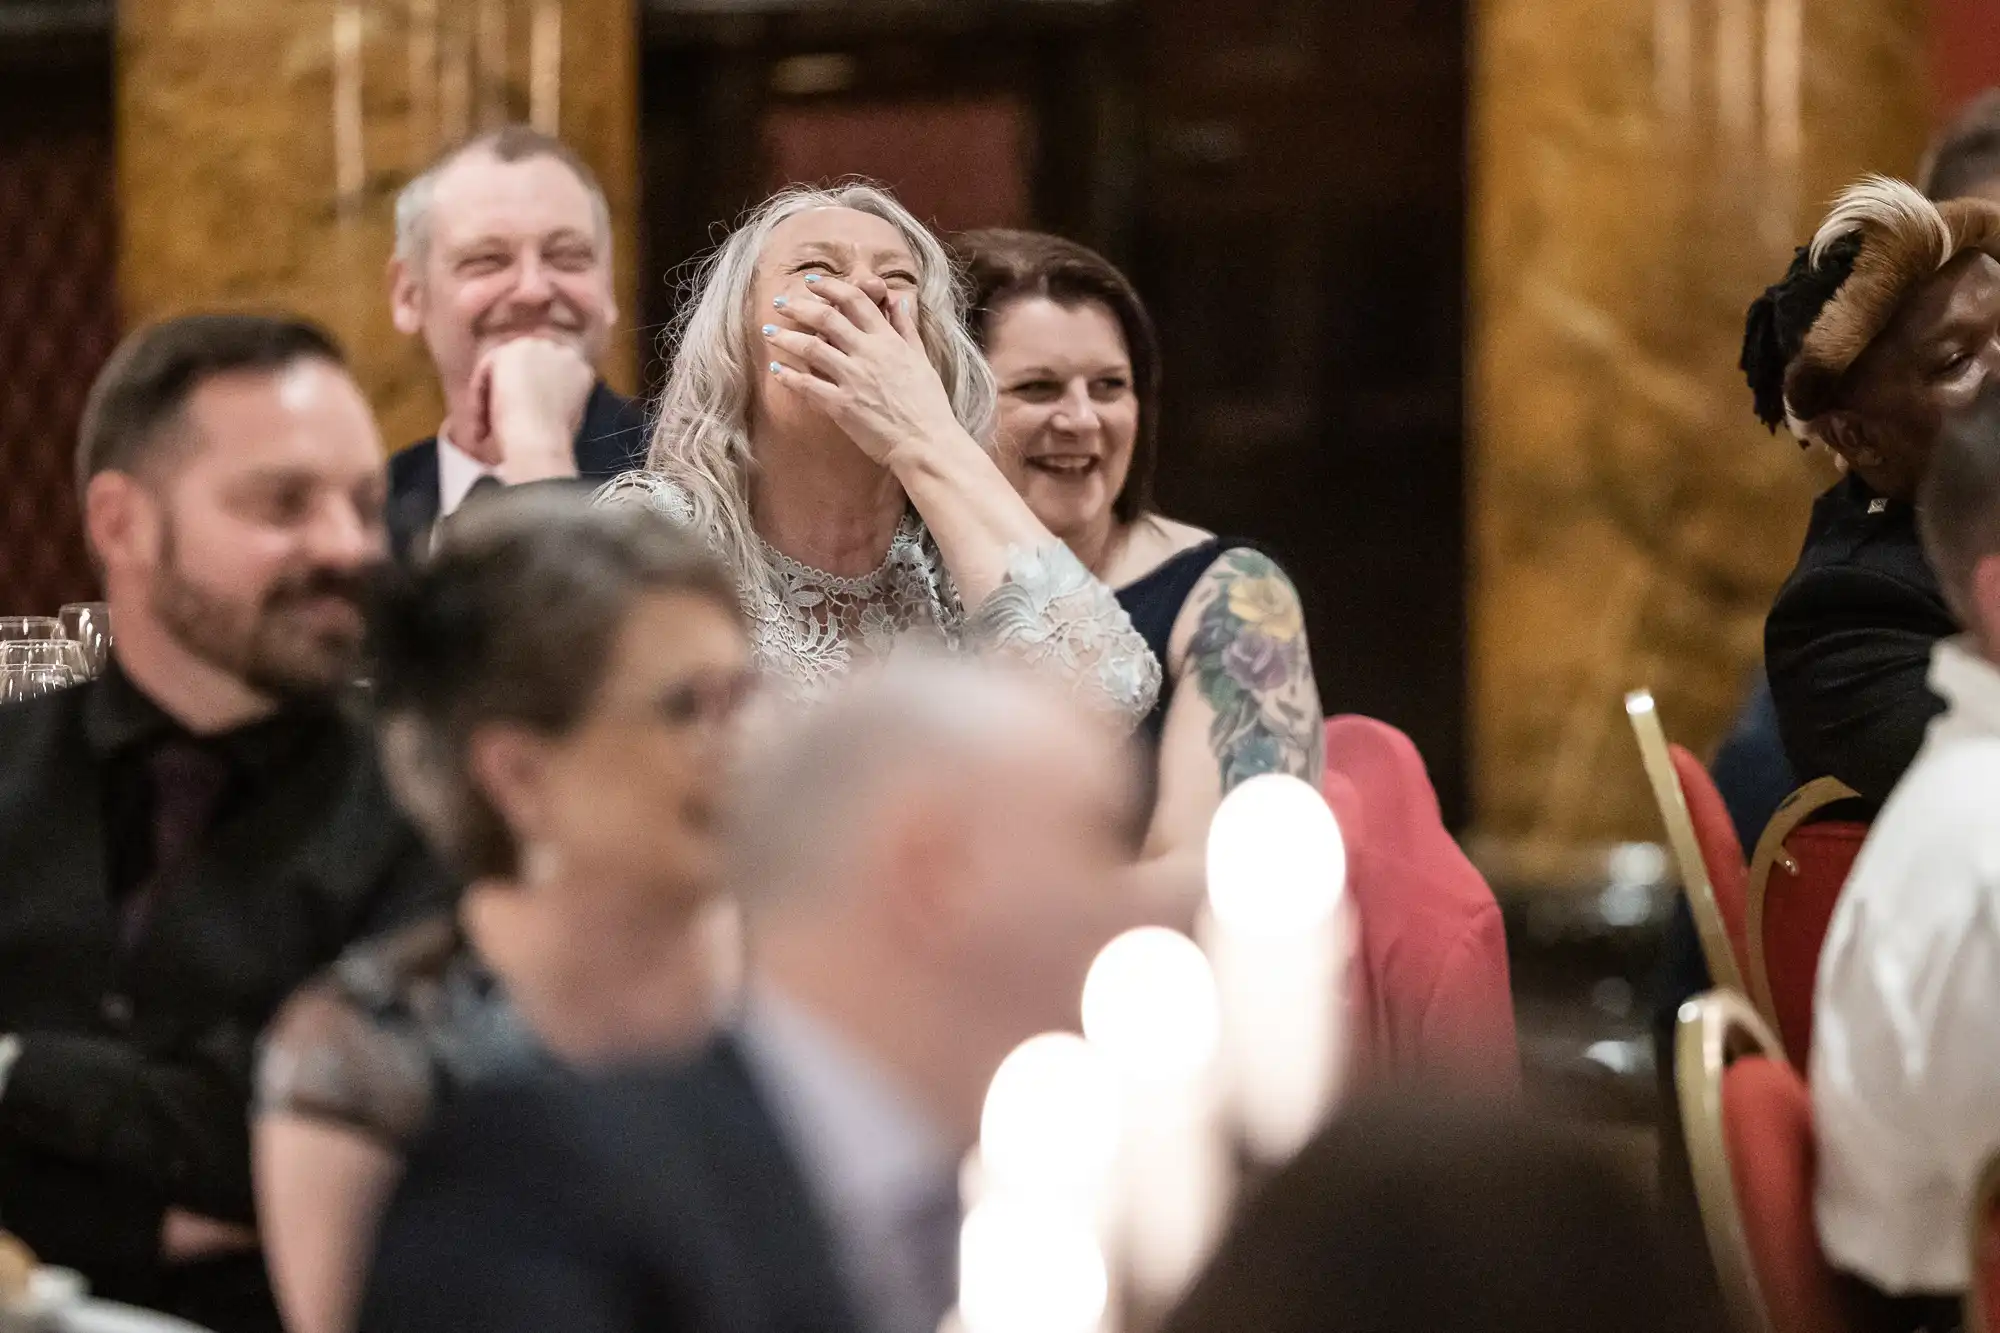 A group of people are seated at a formal event. A woman in focus is laughing with her hand covering her mouth, while others around her are smiling.